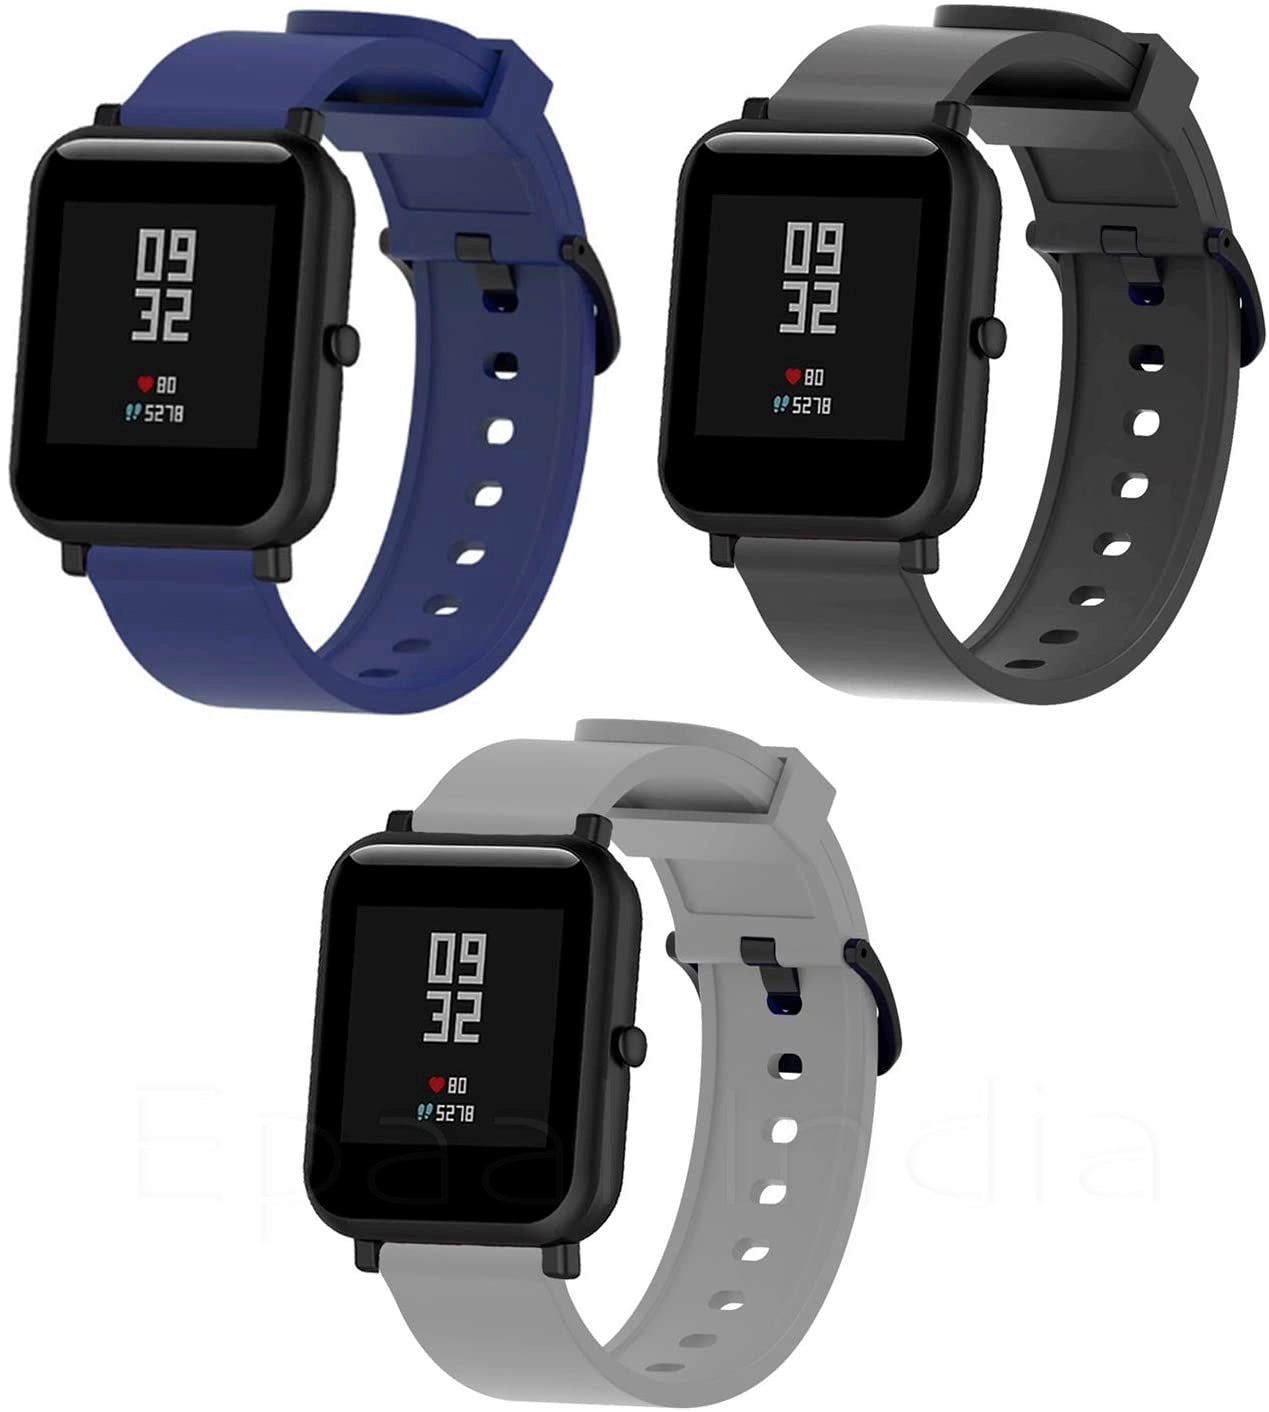 Epaal Pack of 3, 20mm Plain Color Straps for Realme Watch, Amazfit Bip, Amazfit GTS, Galaxy Watch Active 2, Gear S2 Classic, Samsung Gear Straps